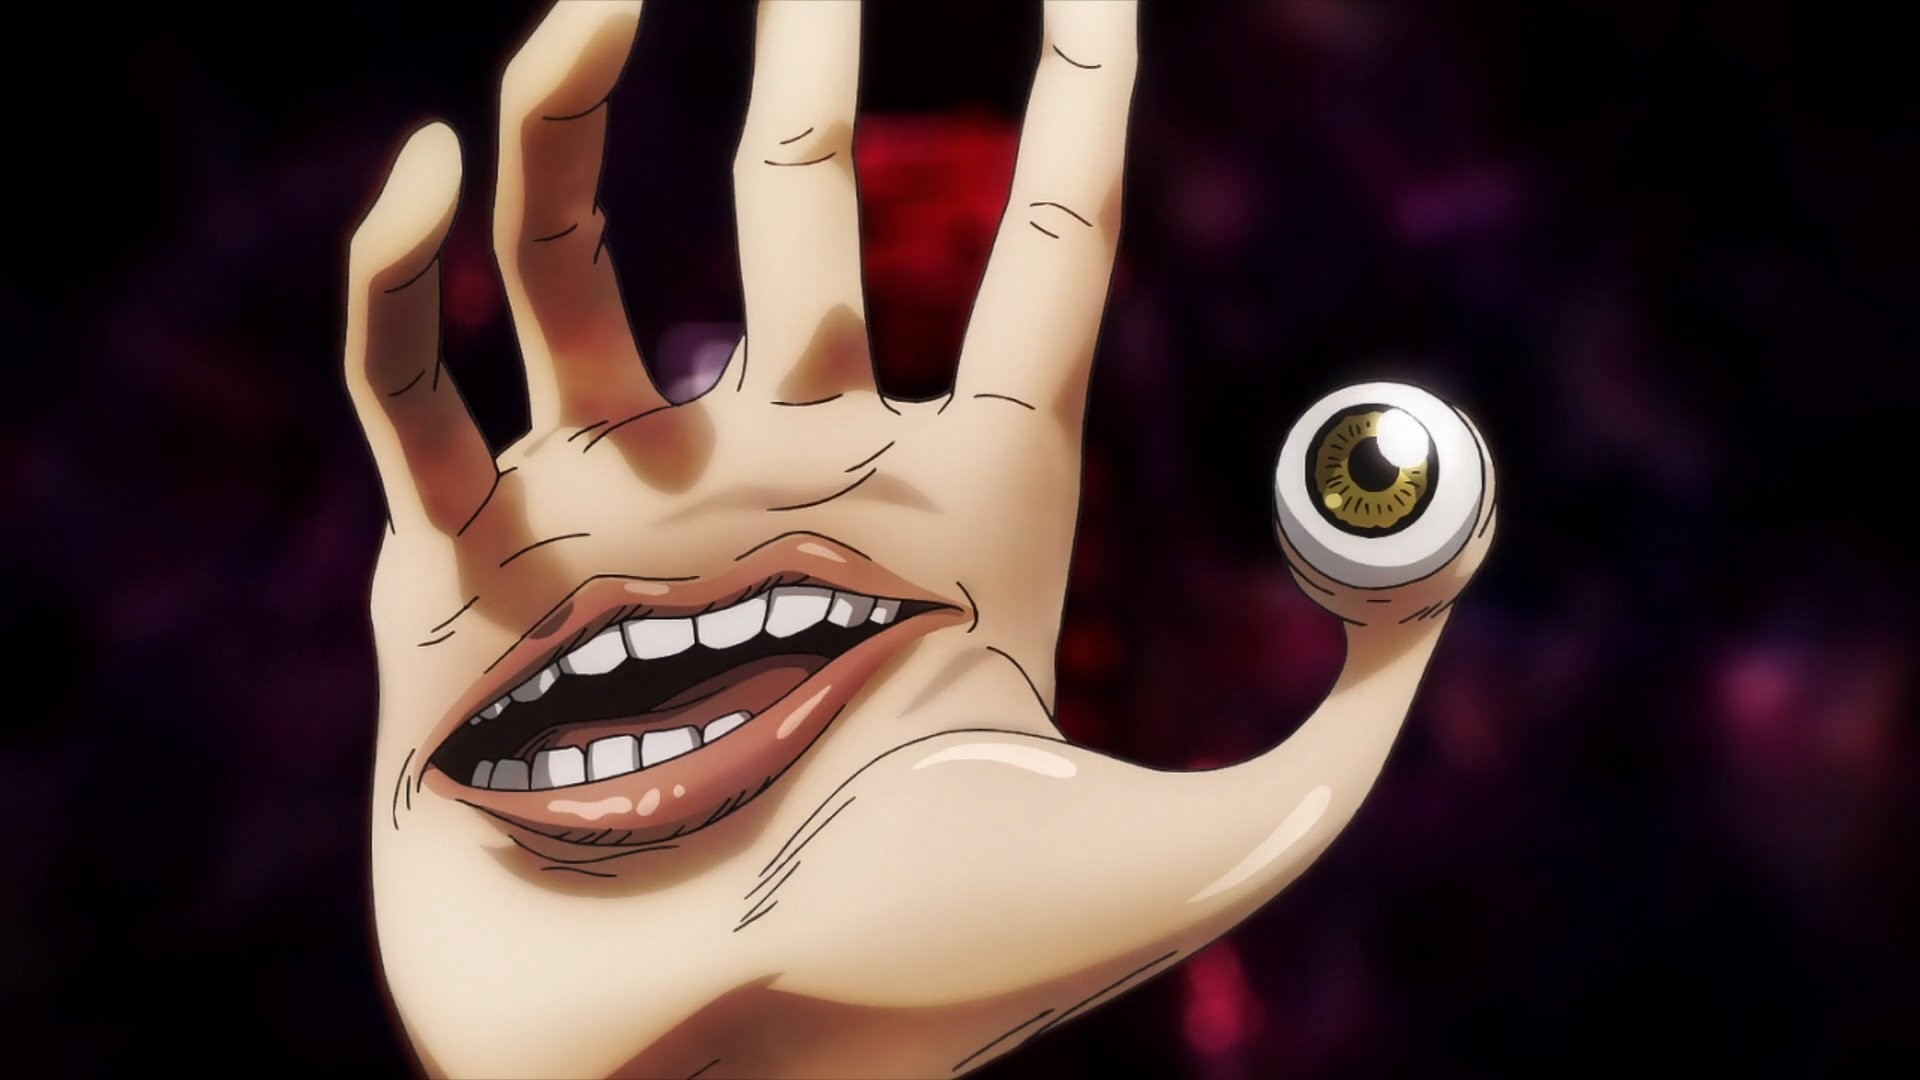 Parasyte Wallpapers Images